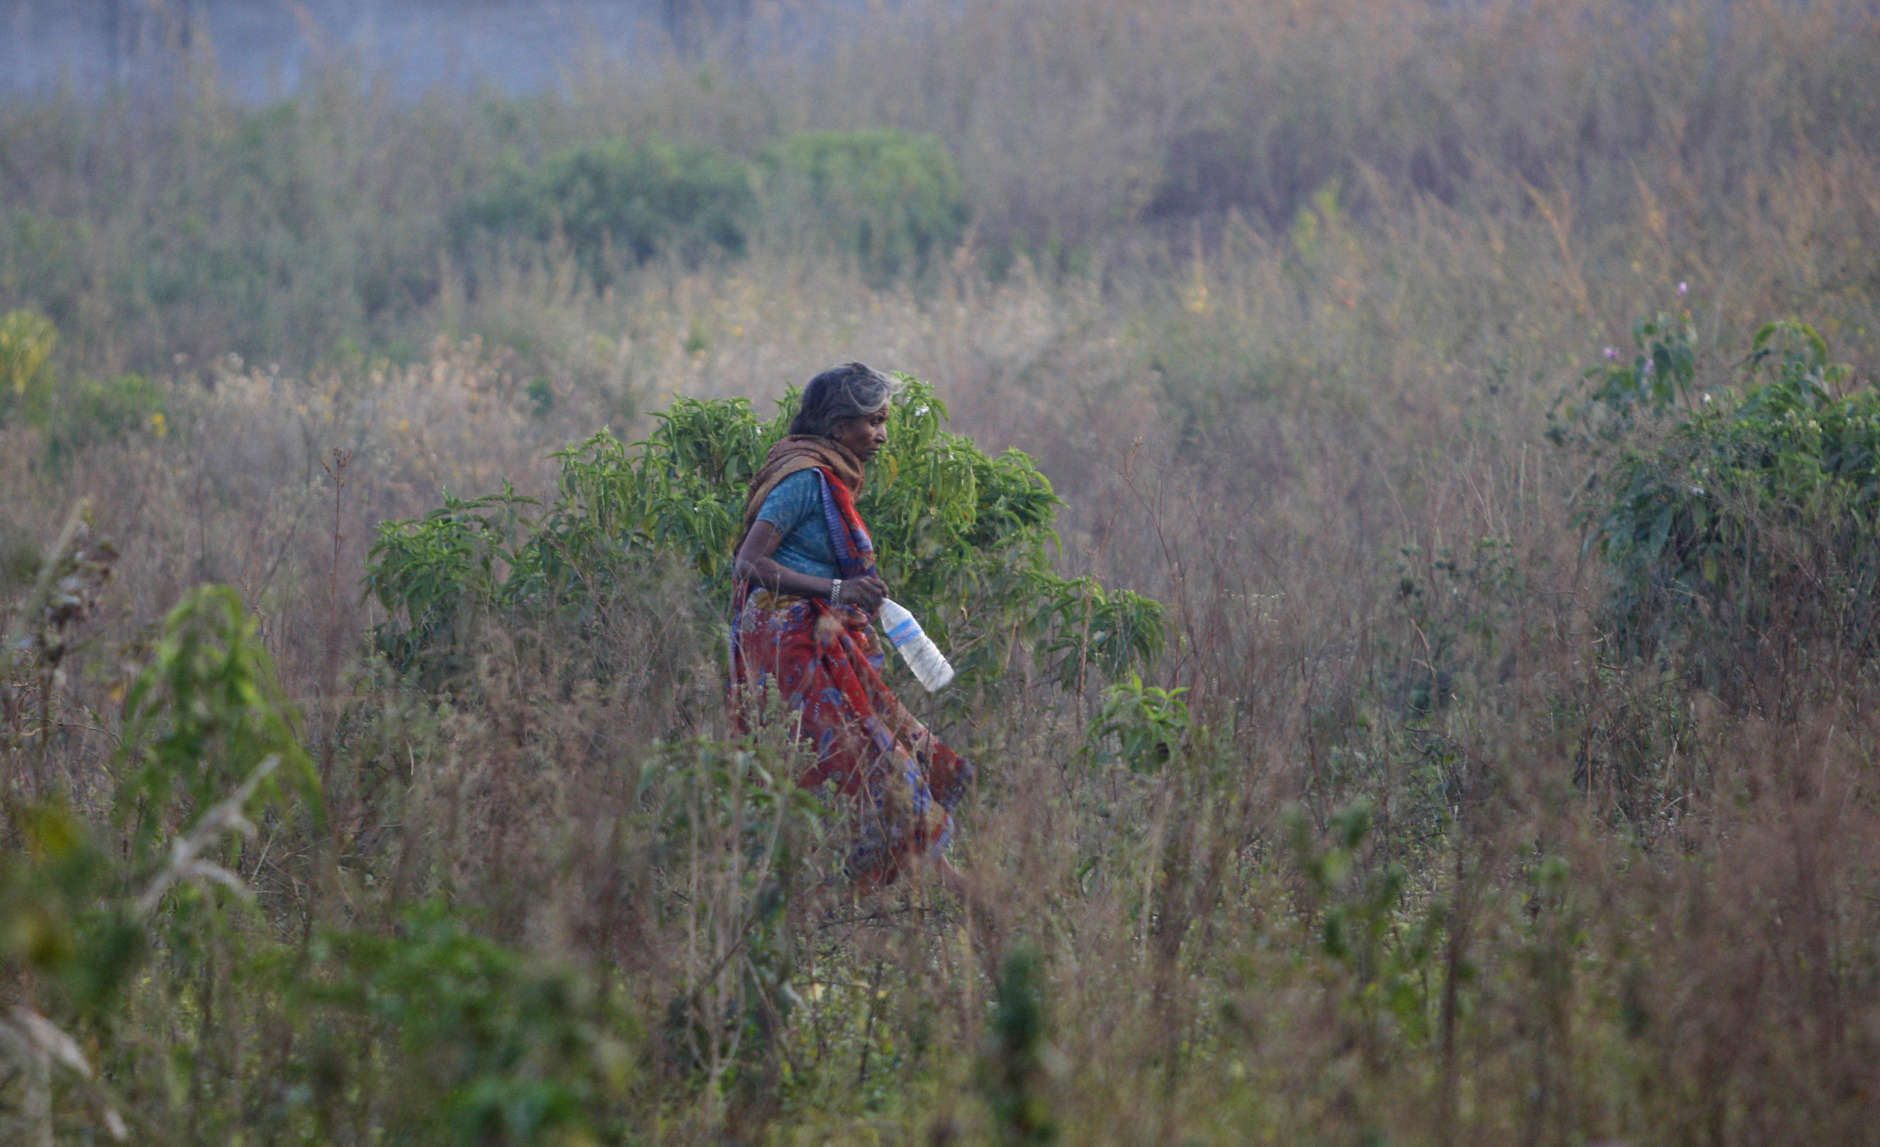 An Indian woman walks in a field after relieving herself in the open, on World Toilet Day on the outskirts of Jammu, India, Wednesday, Nov. 19, 2014. U.N. figures show of India's 1.2 billion people, 665 million, mostly those in the countryside, don't have access to a private toilet or latrine, something taken for granted in developed nations. Some villages have public bathrooms, but many women avoid using them because they are usually in a state of disrepair and because men often hang around and harass the women. (AP Photo/Channi Anand)